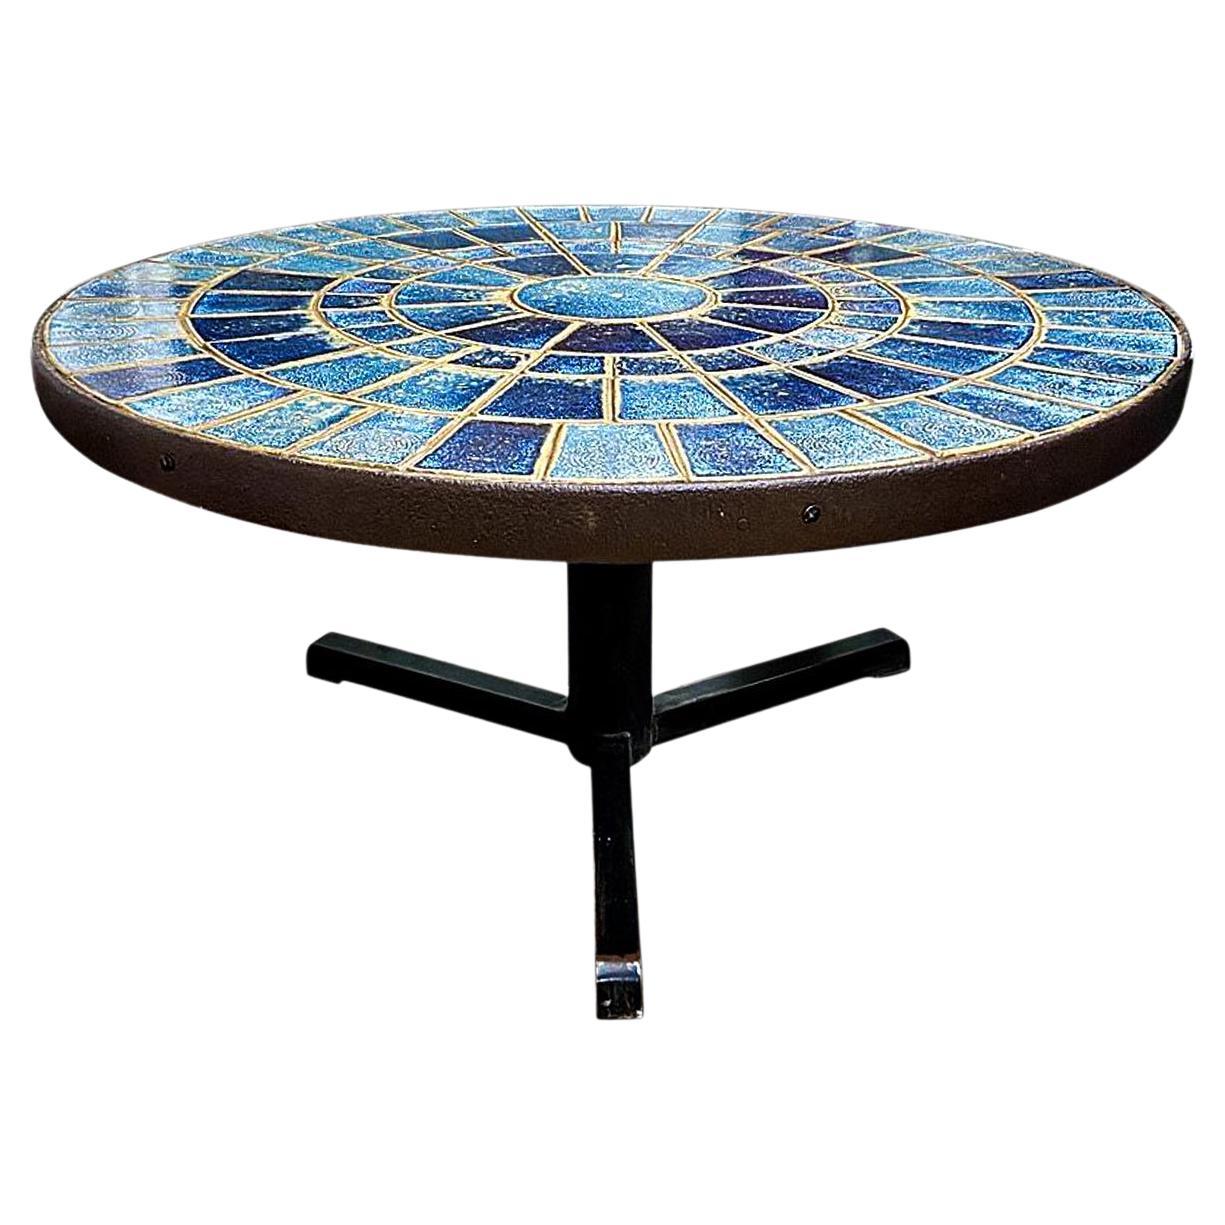 Round Modern Coffee Table in Iron + Blue Ceramic Tile